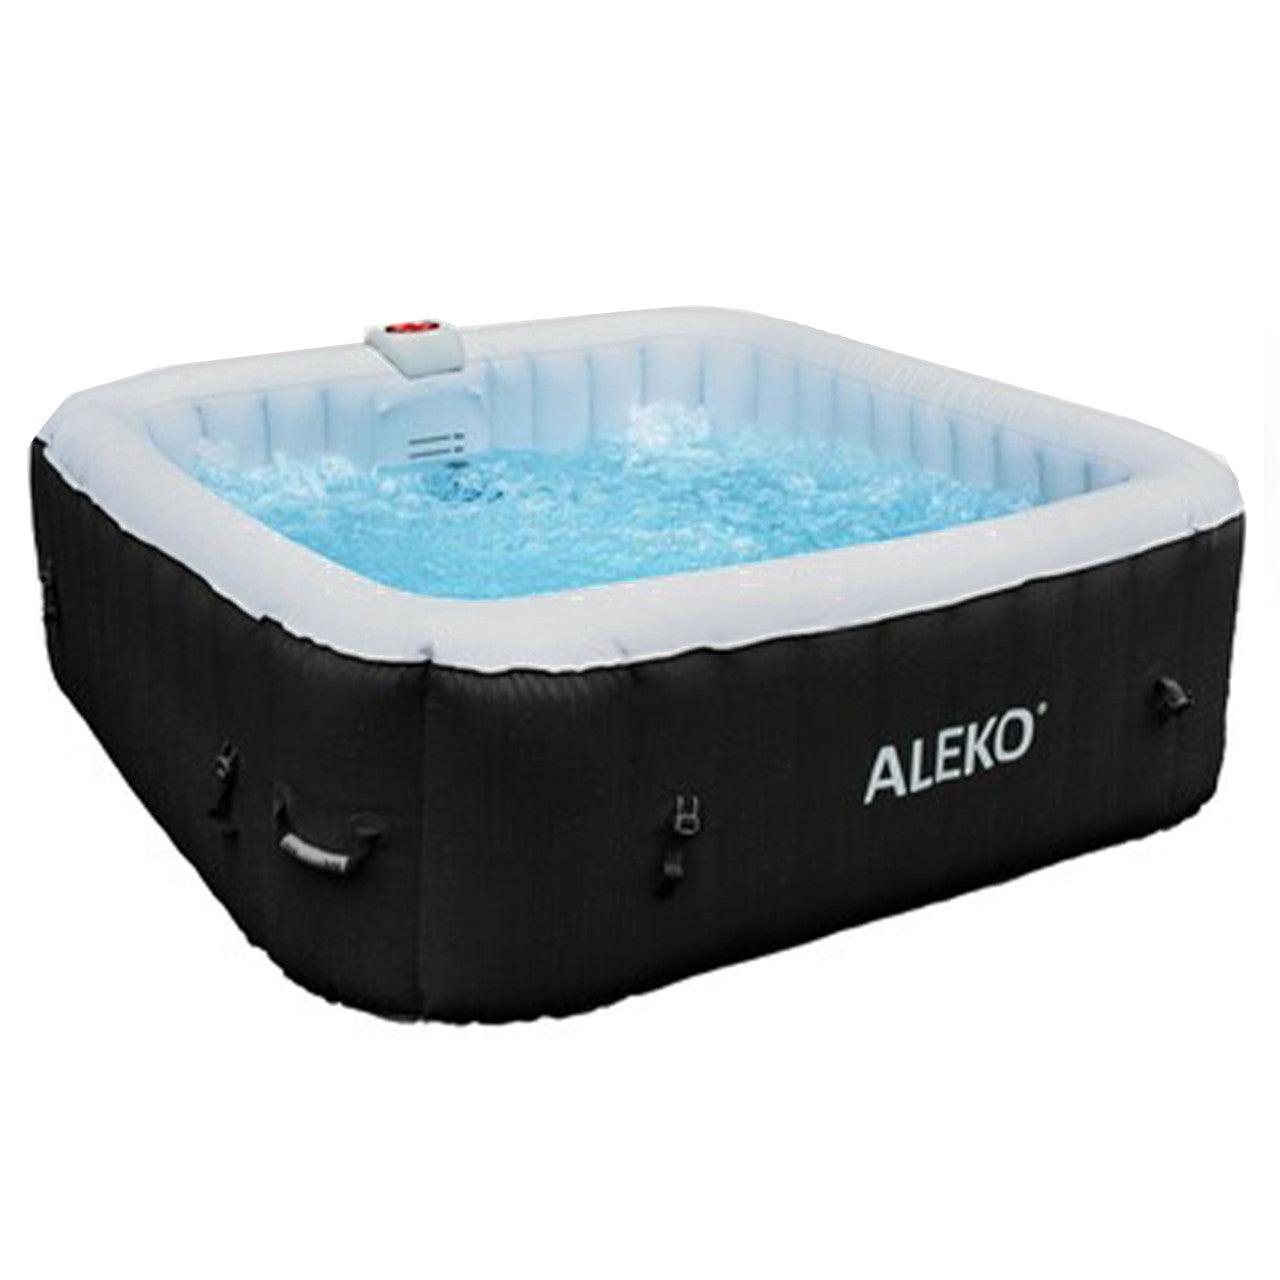 ALEKO 6 Person Black and White 265 Gallon Square Inflatable Jetted Hot ...